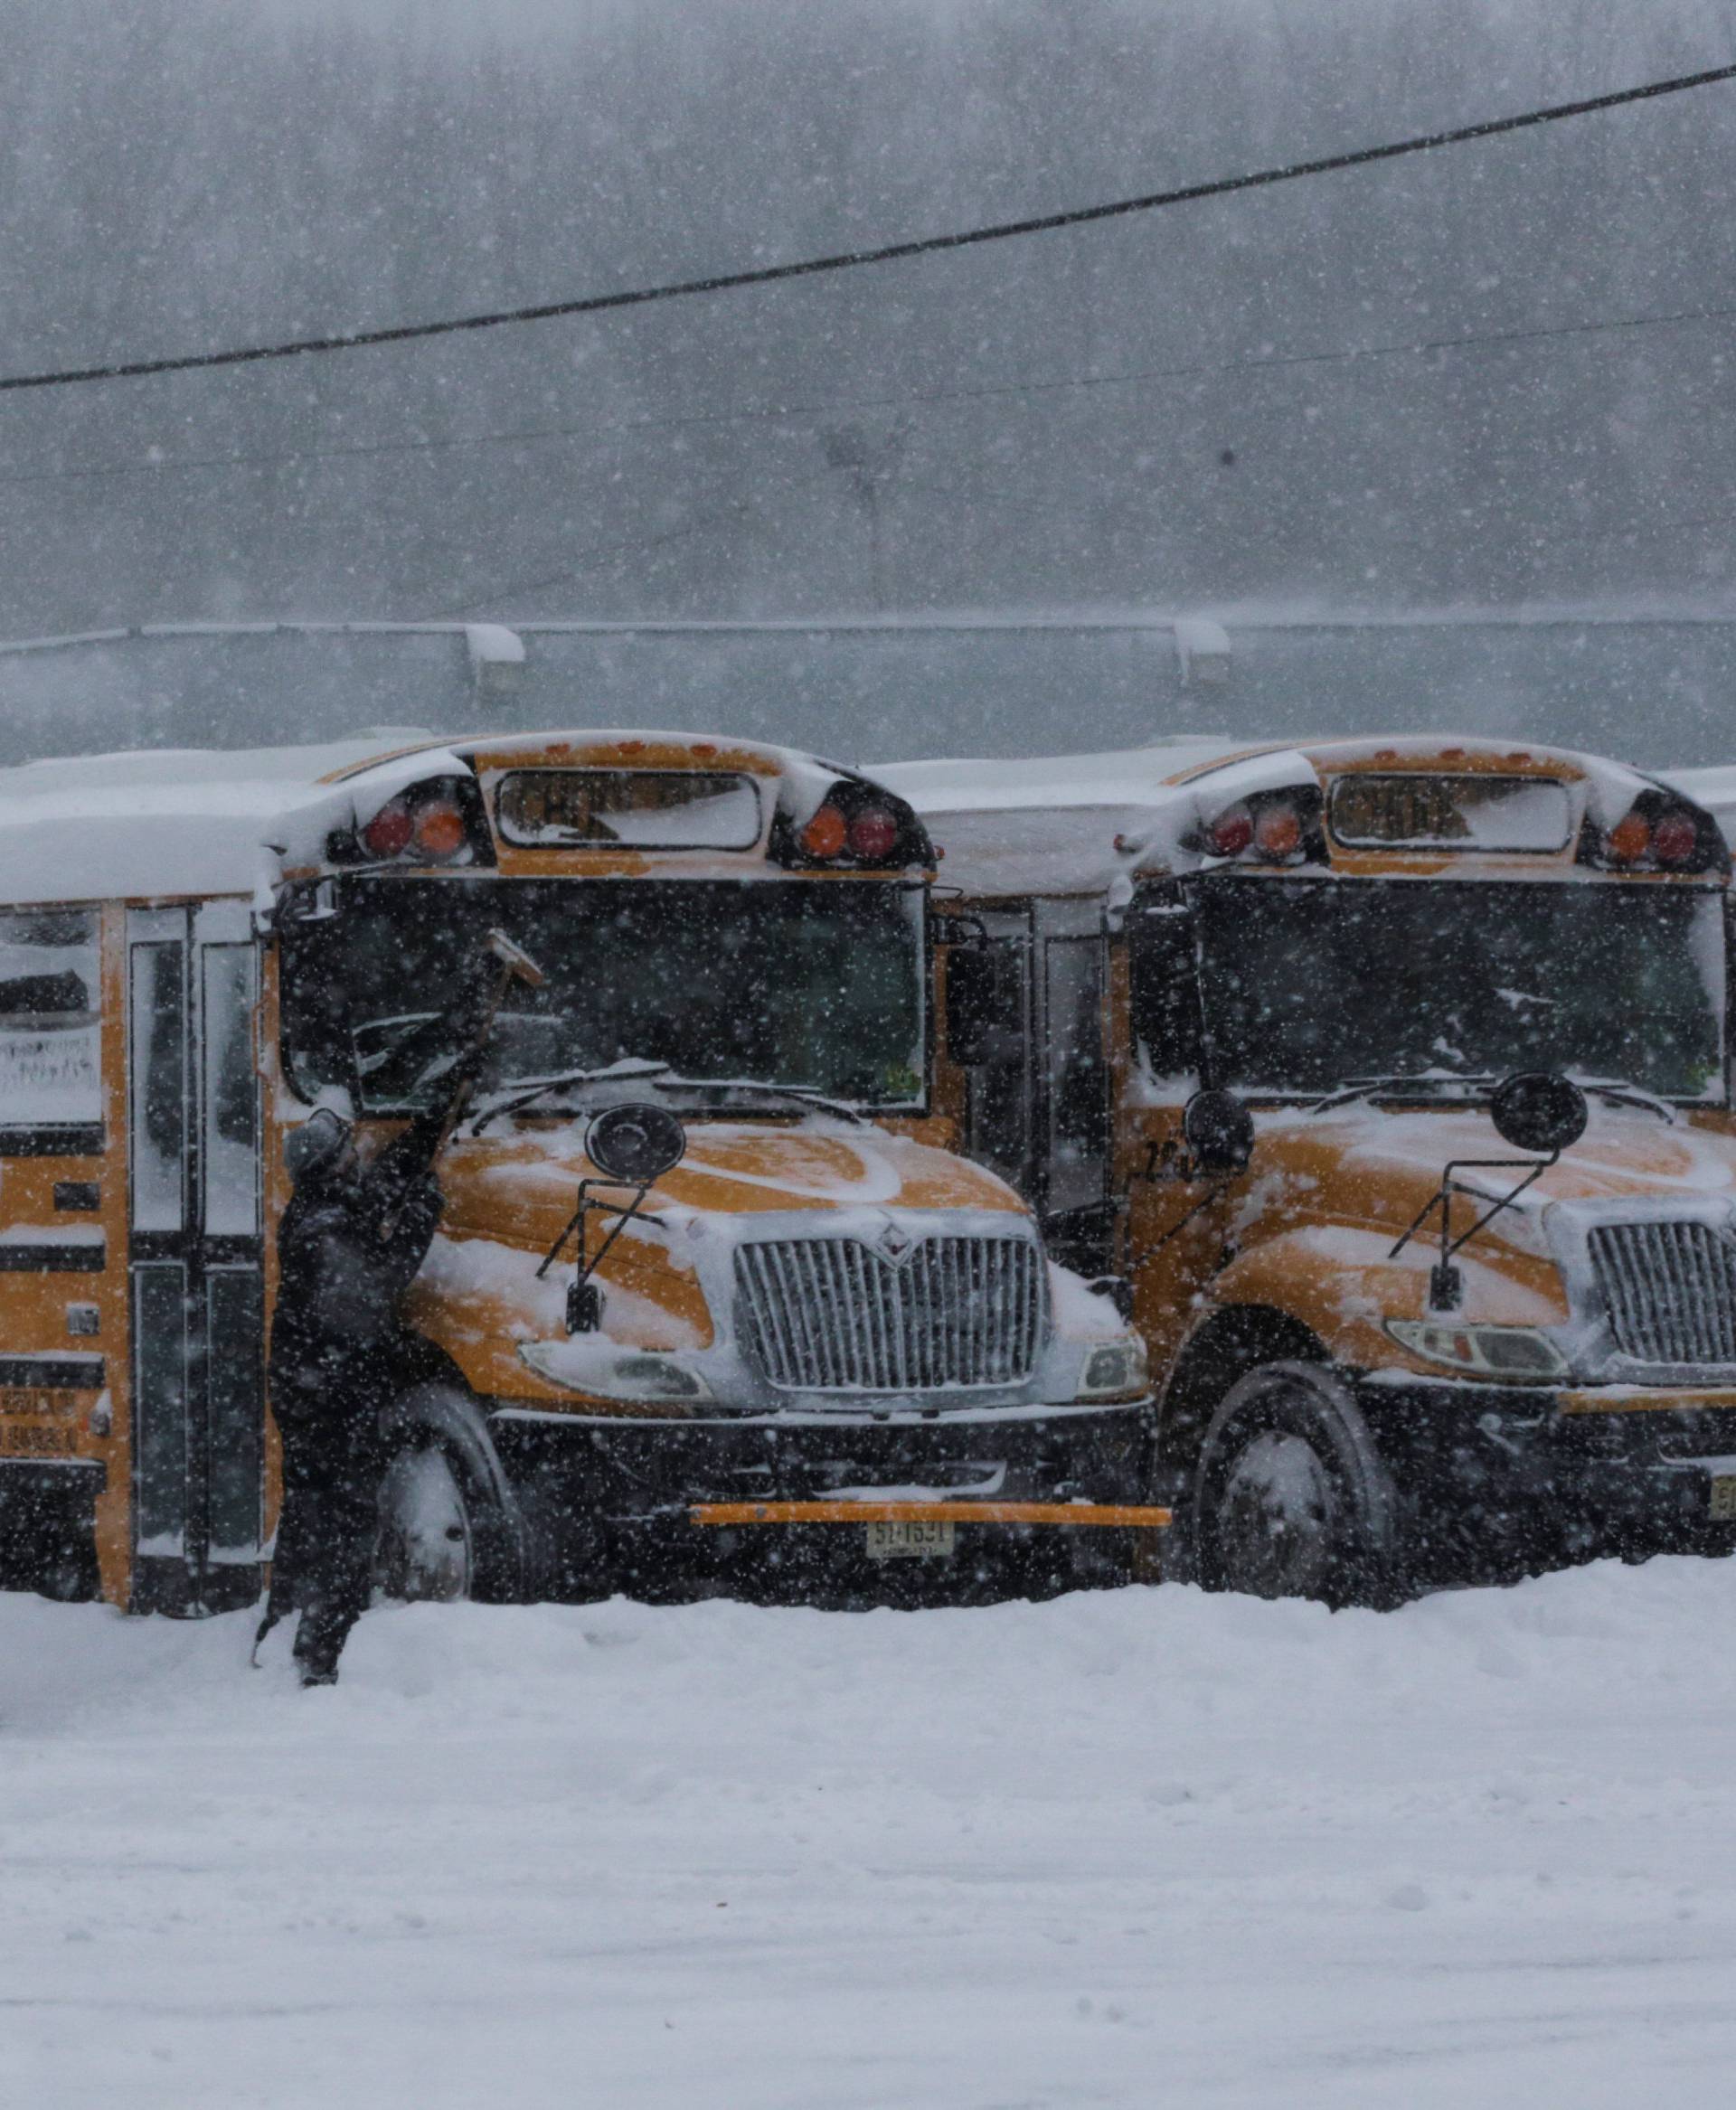 People clean school buses during Storm Grayson at the Jersey shore in Keansburg, New Jersey